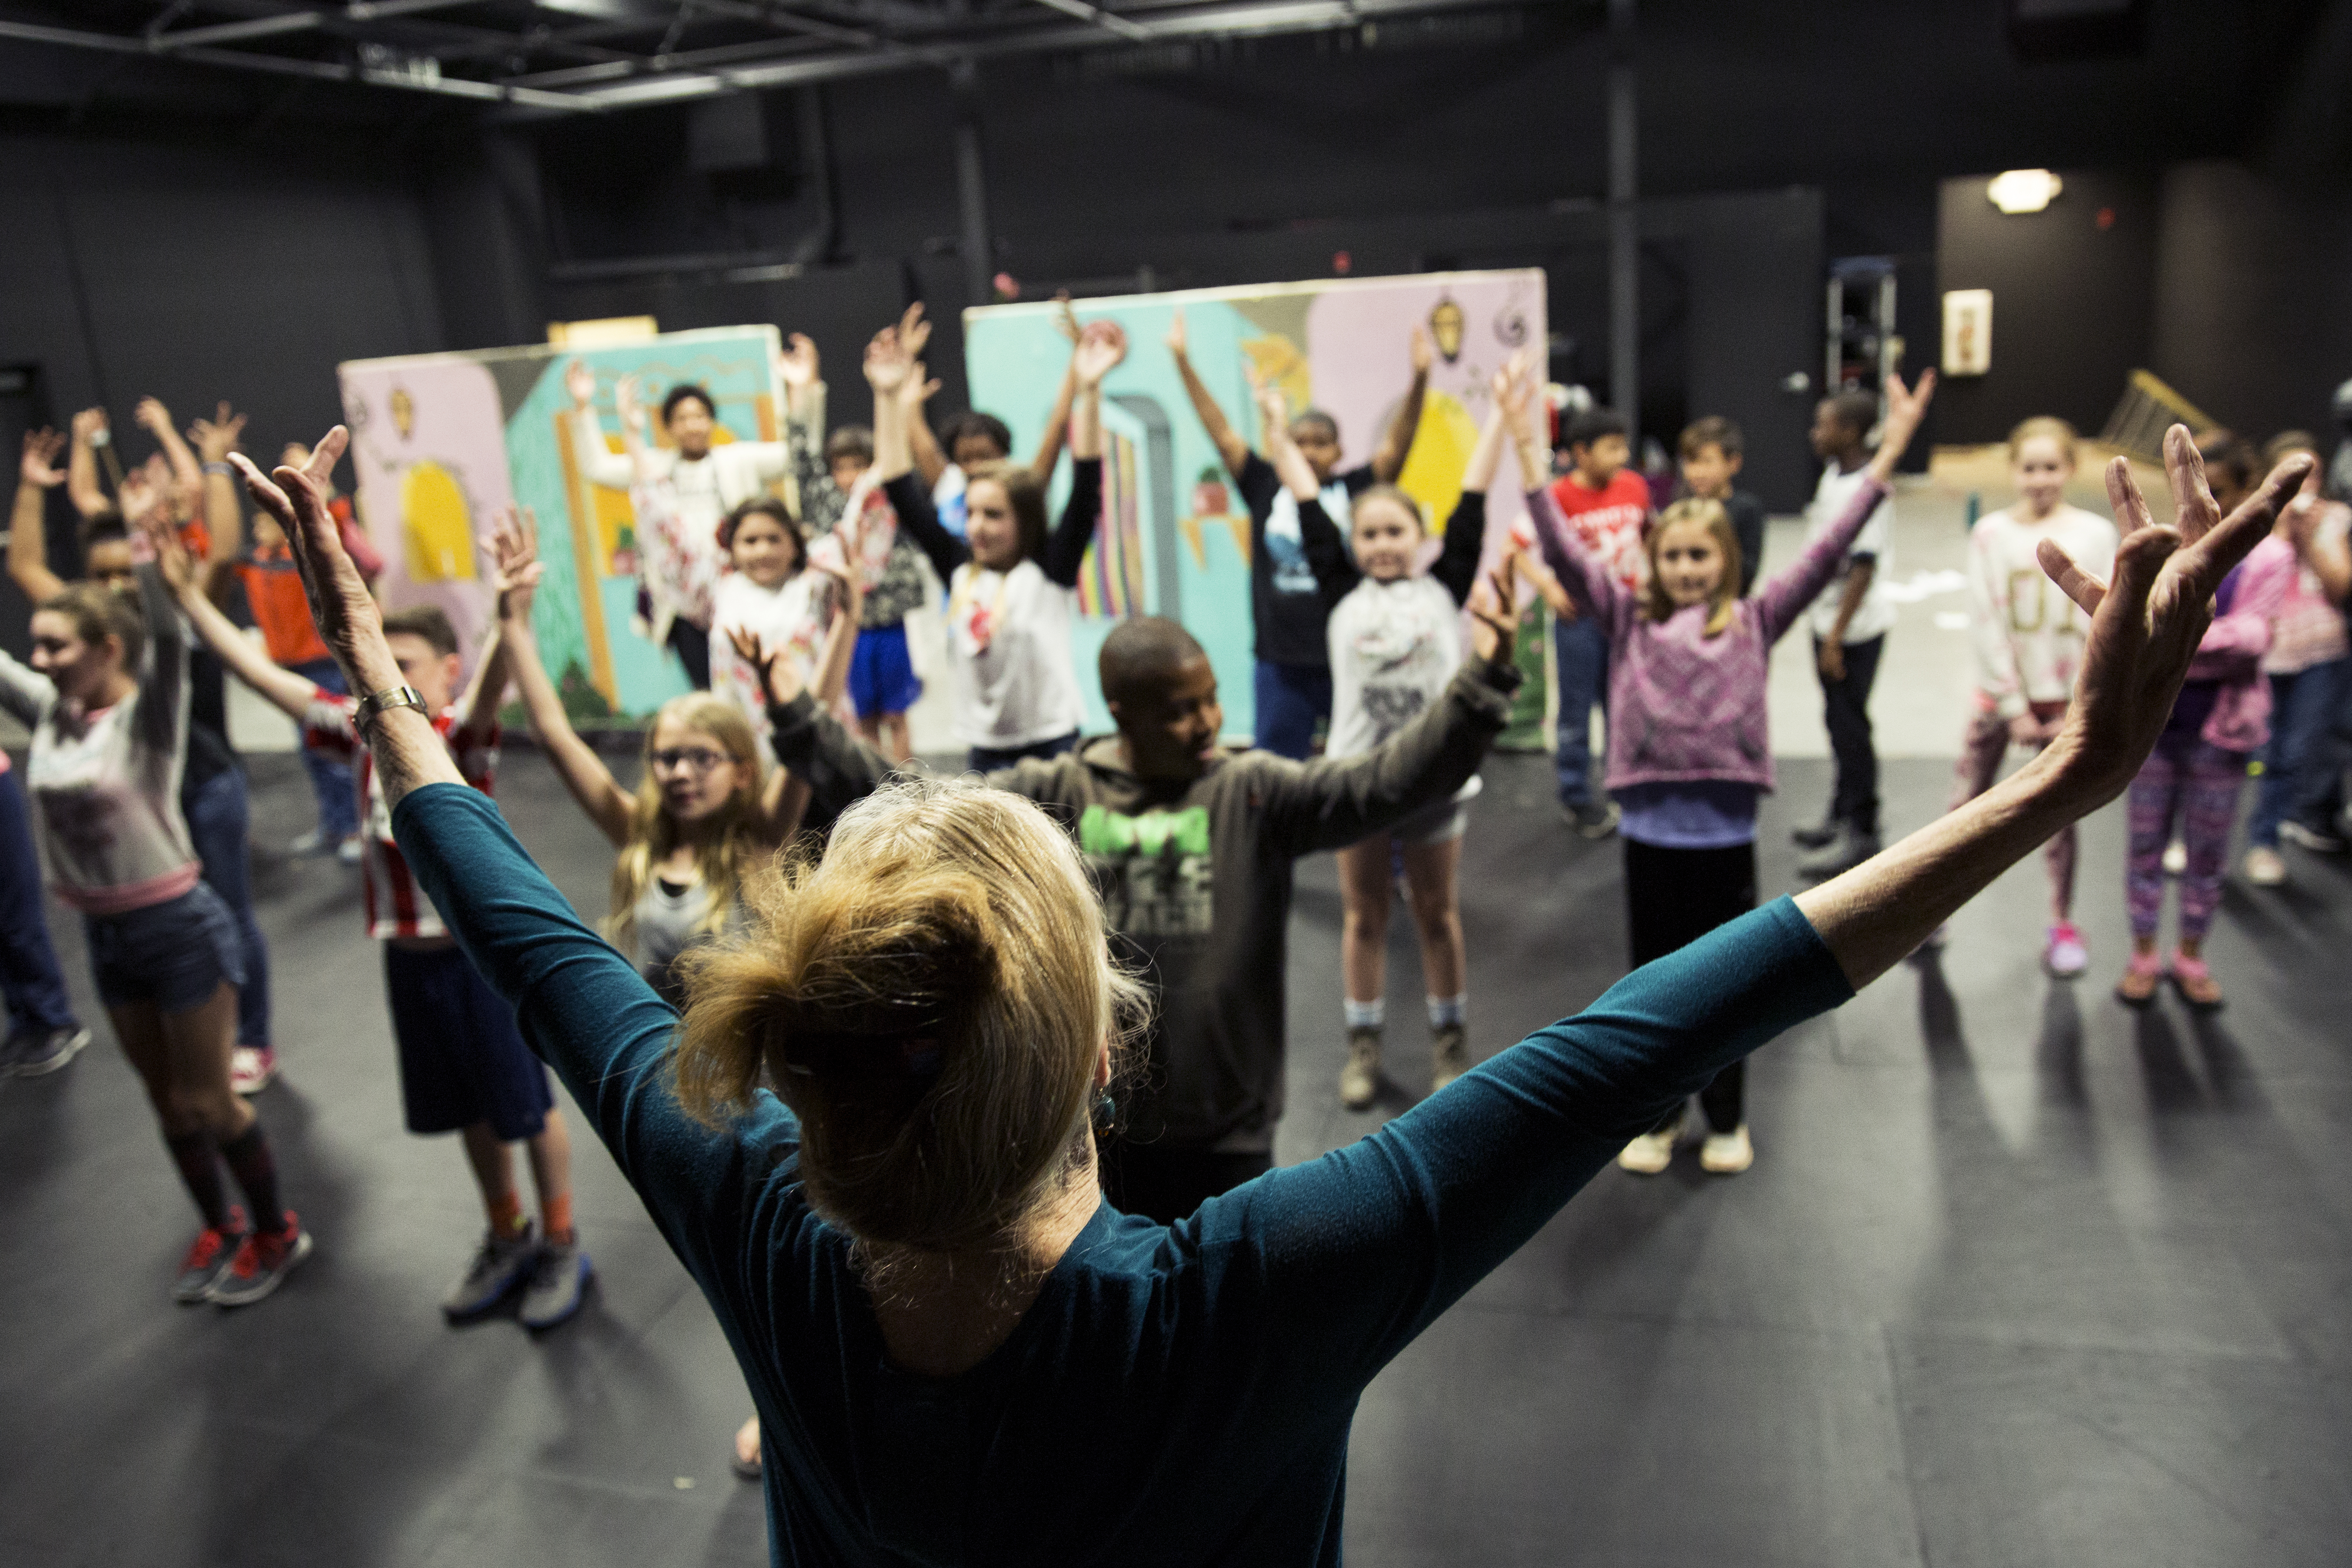 Students in dance class